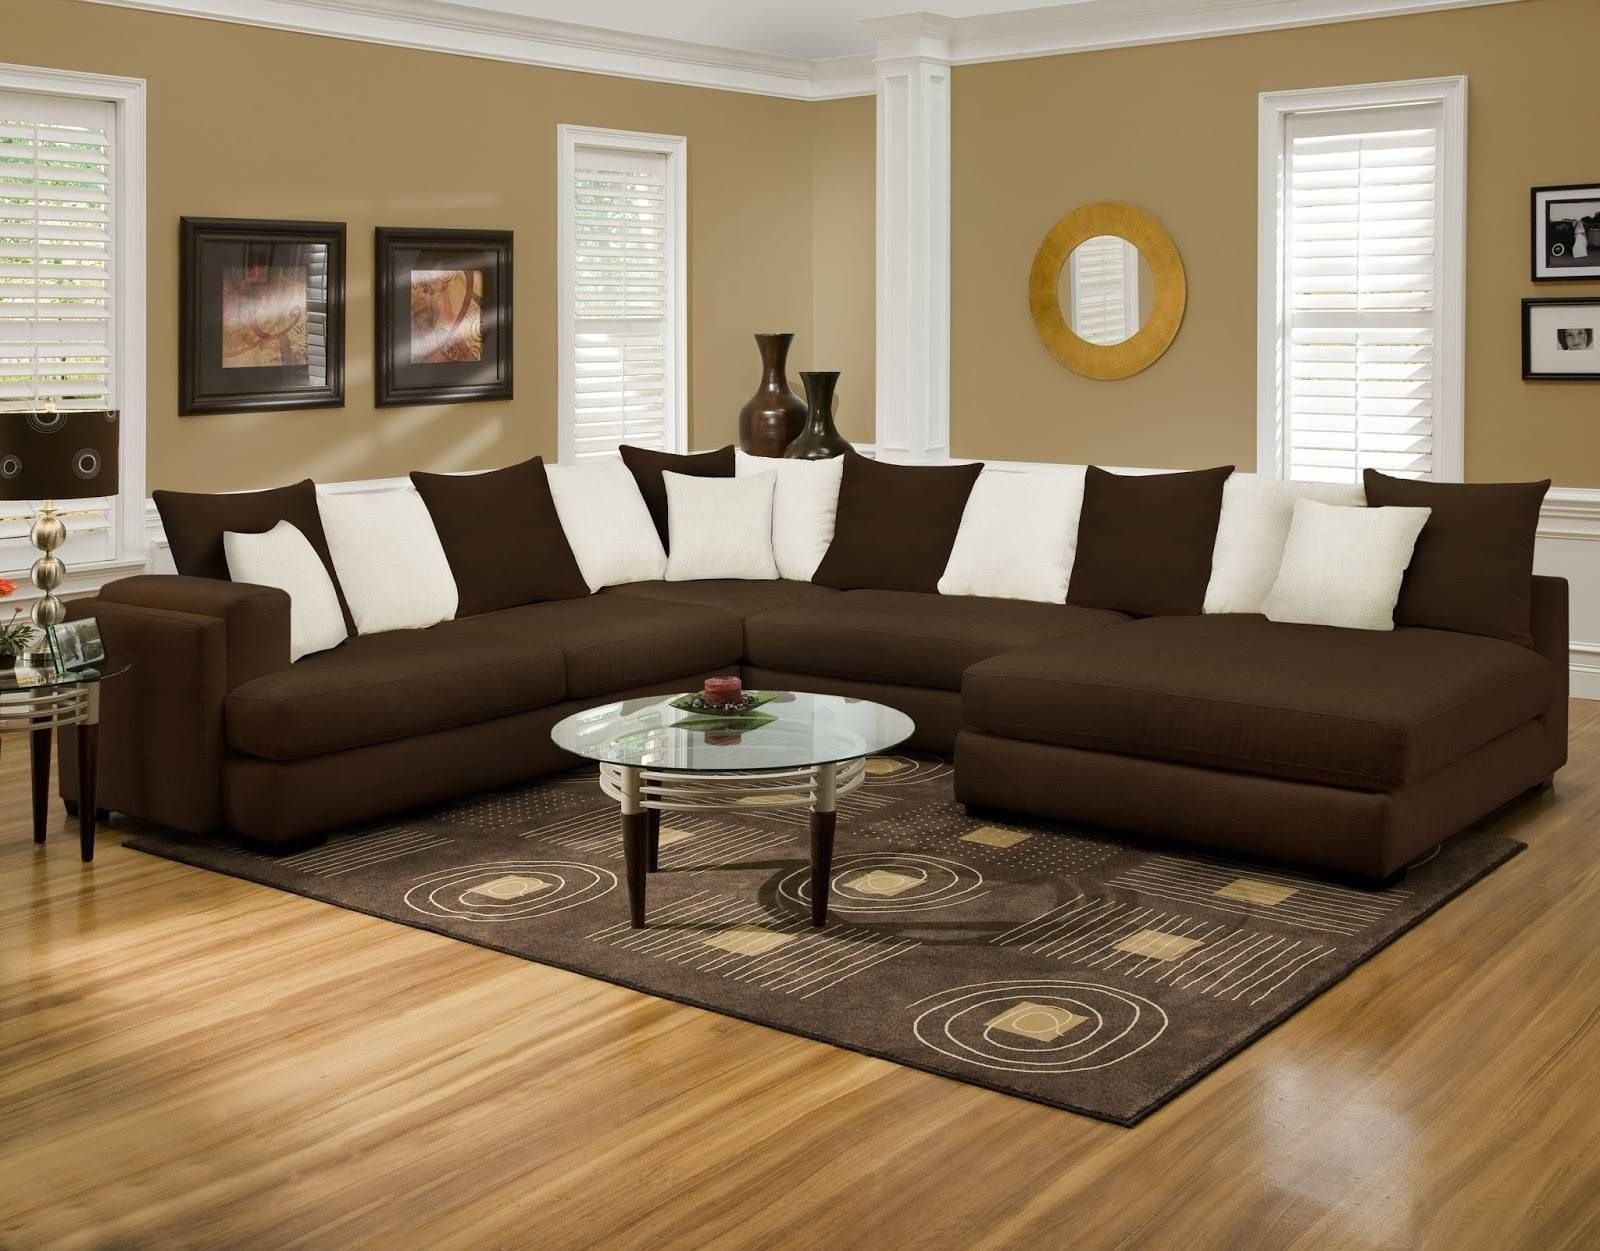 Albany Industries Sectional Sofa | Interior Design Throughout Albany Industries Sectional Sofa (View 9 of 30)